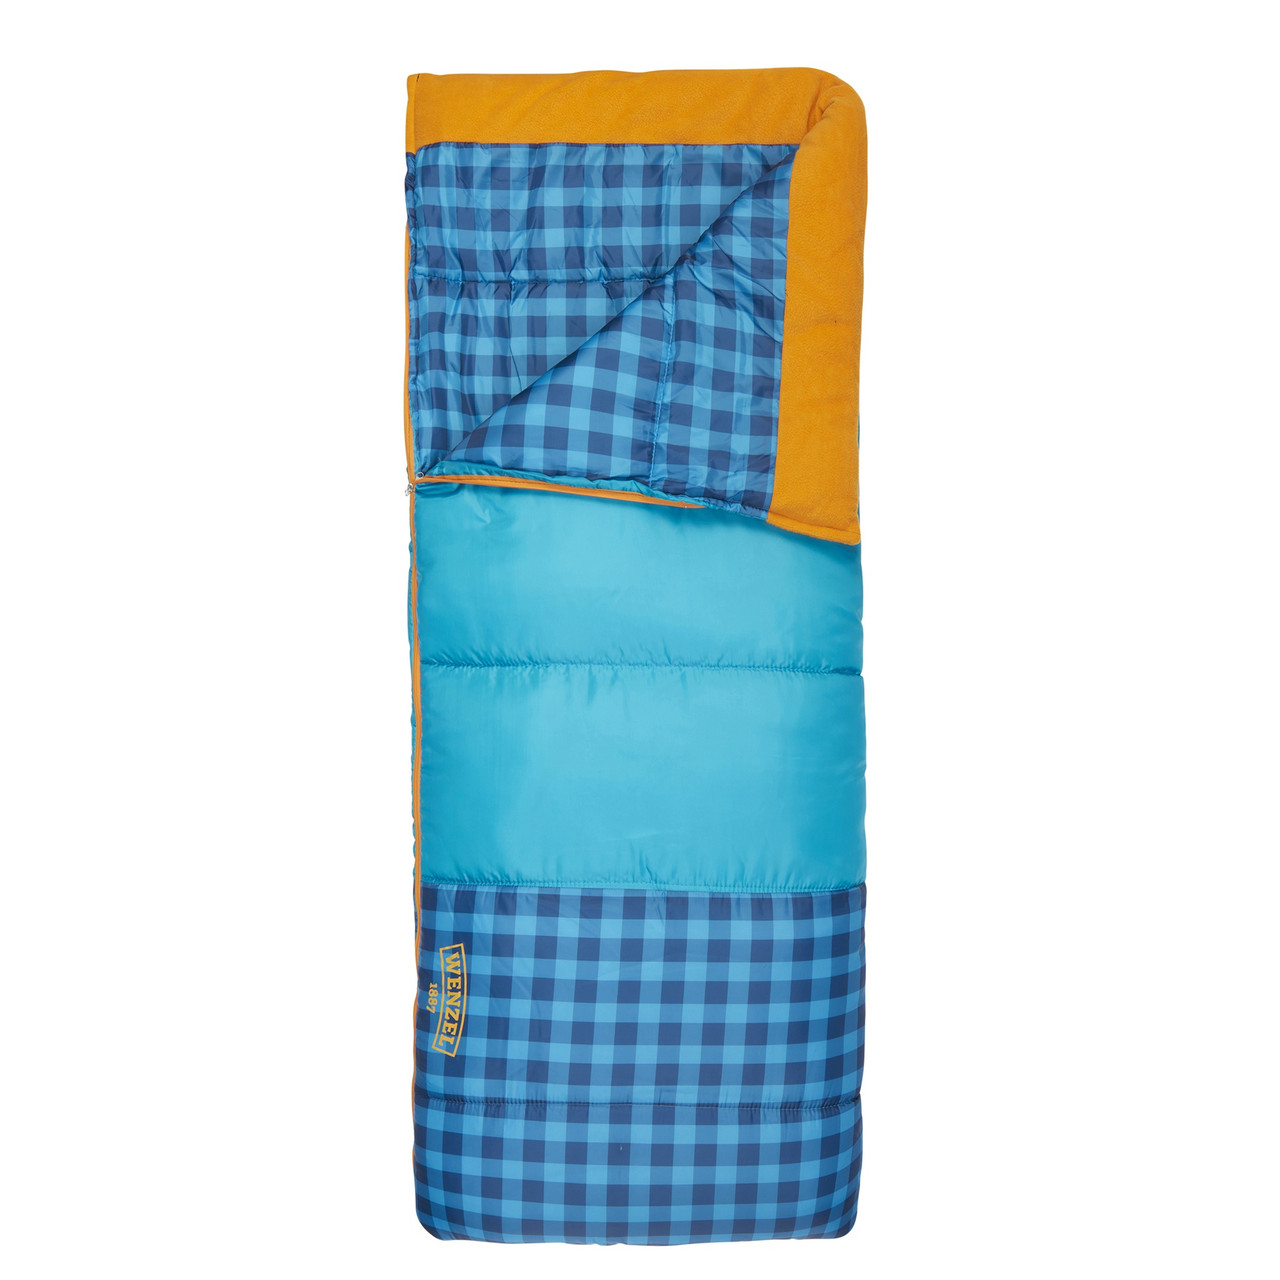 Wenzel Sapling Youth Sleeping Bag, blue, shown partially unzipped